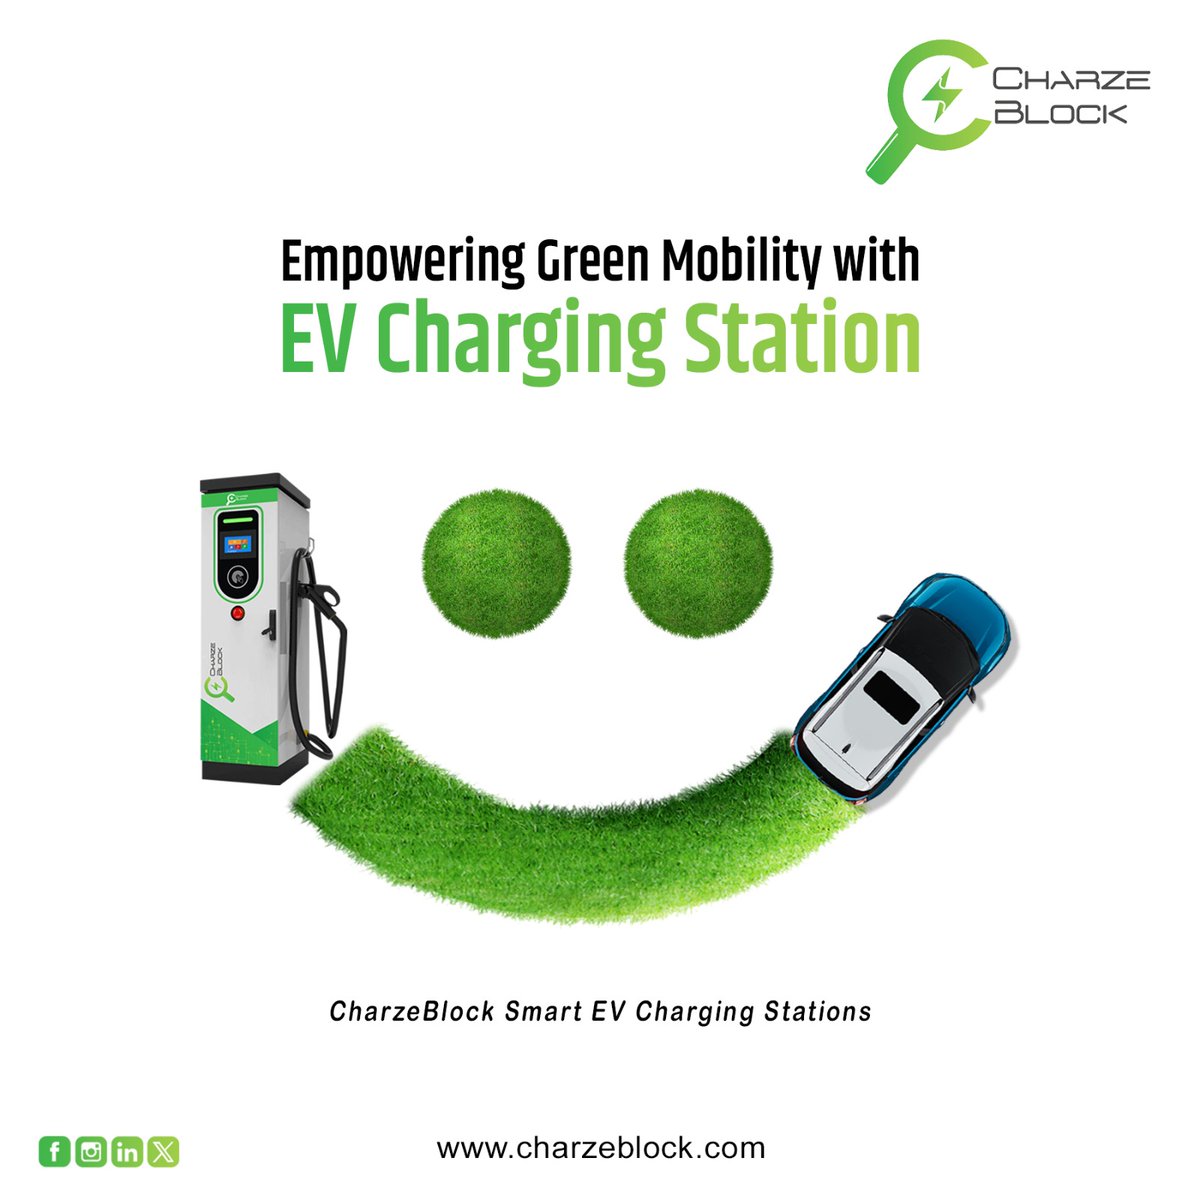 Driving change, one charge at a time! 🚗⚡
Embrace a #sustainable future with our EV charging stations.

#Clean, #green, and ready for the road ahead. 🌿🌍

#GreenMobility #EVCharging
#SustainableTransport #charzeblock 

Connect with us charzeblock.com